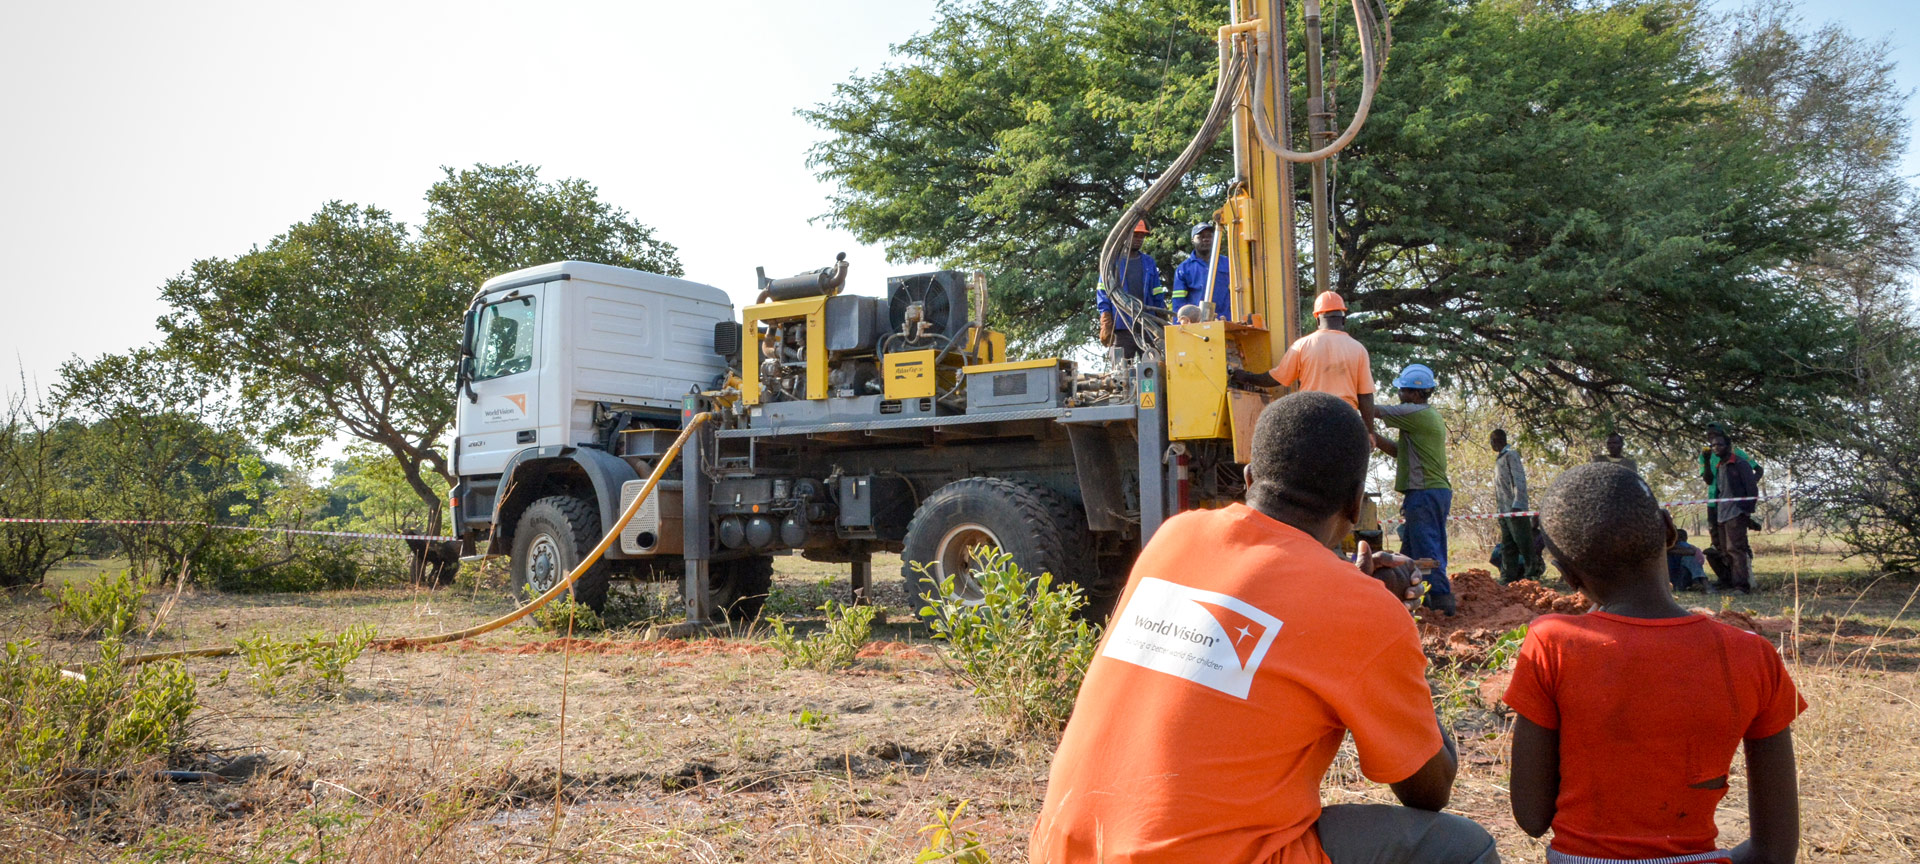 A boy stands beside a man in an orange World Vision shirt, watching a well-drilling rig. 